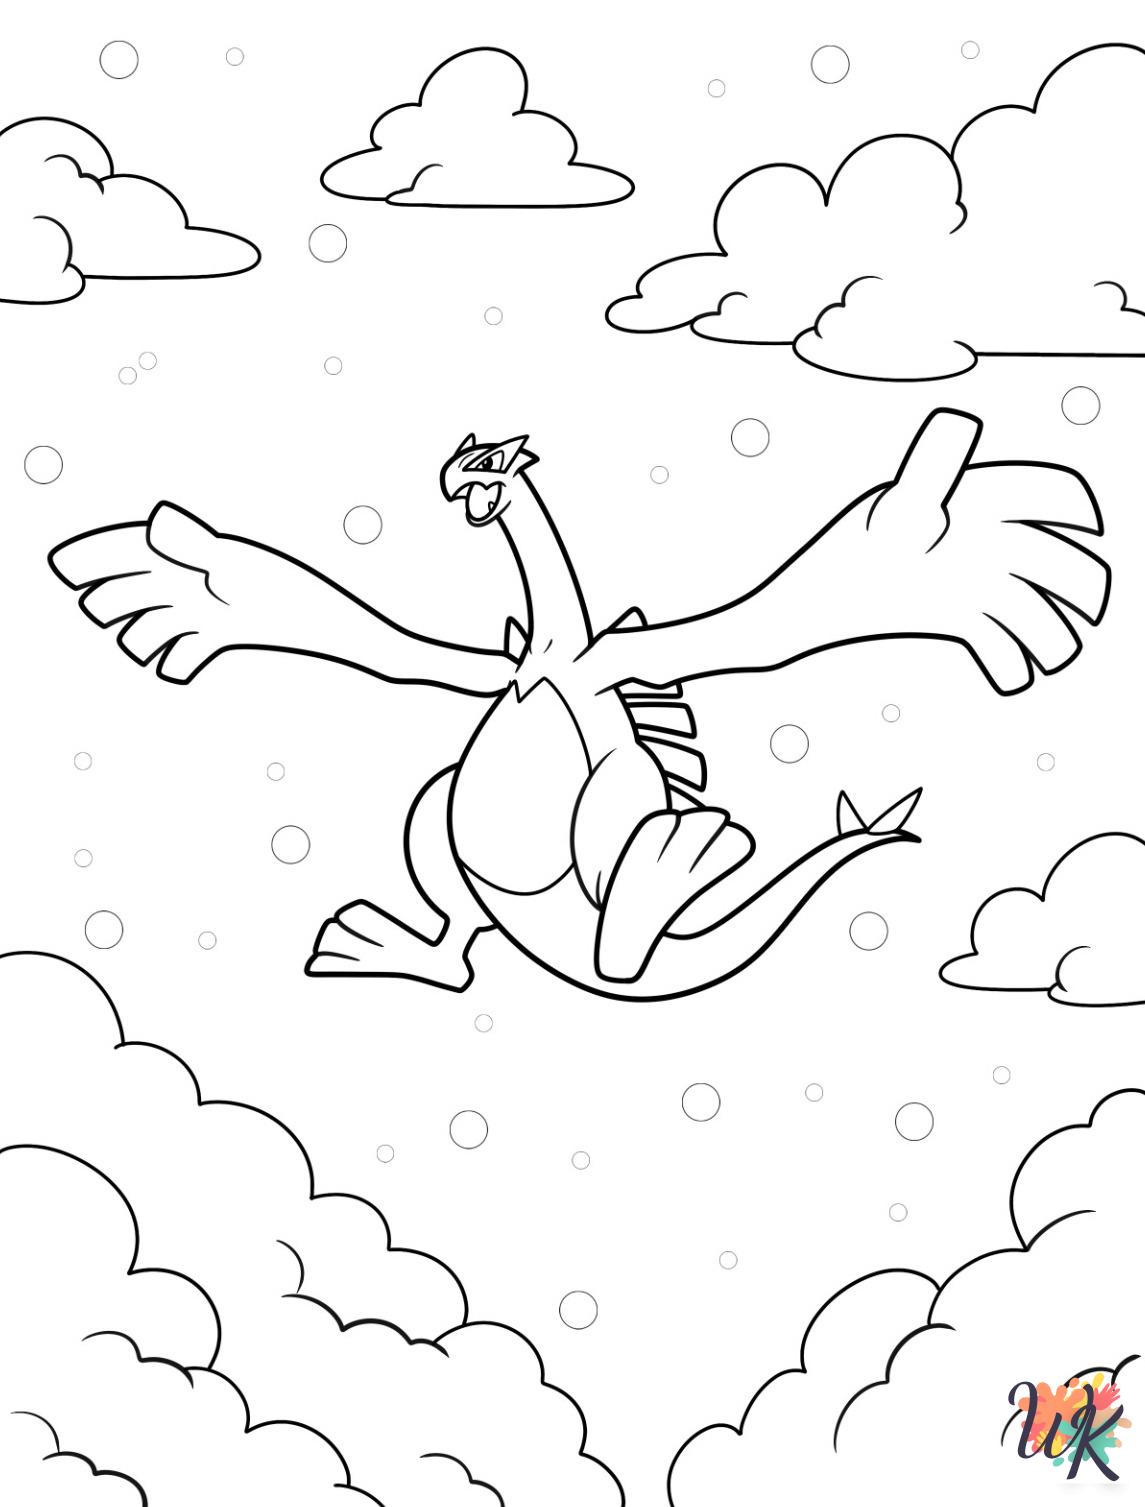 Legendary Pokemon adult coloring pages